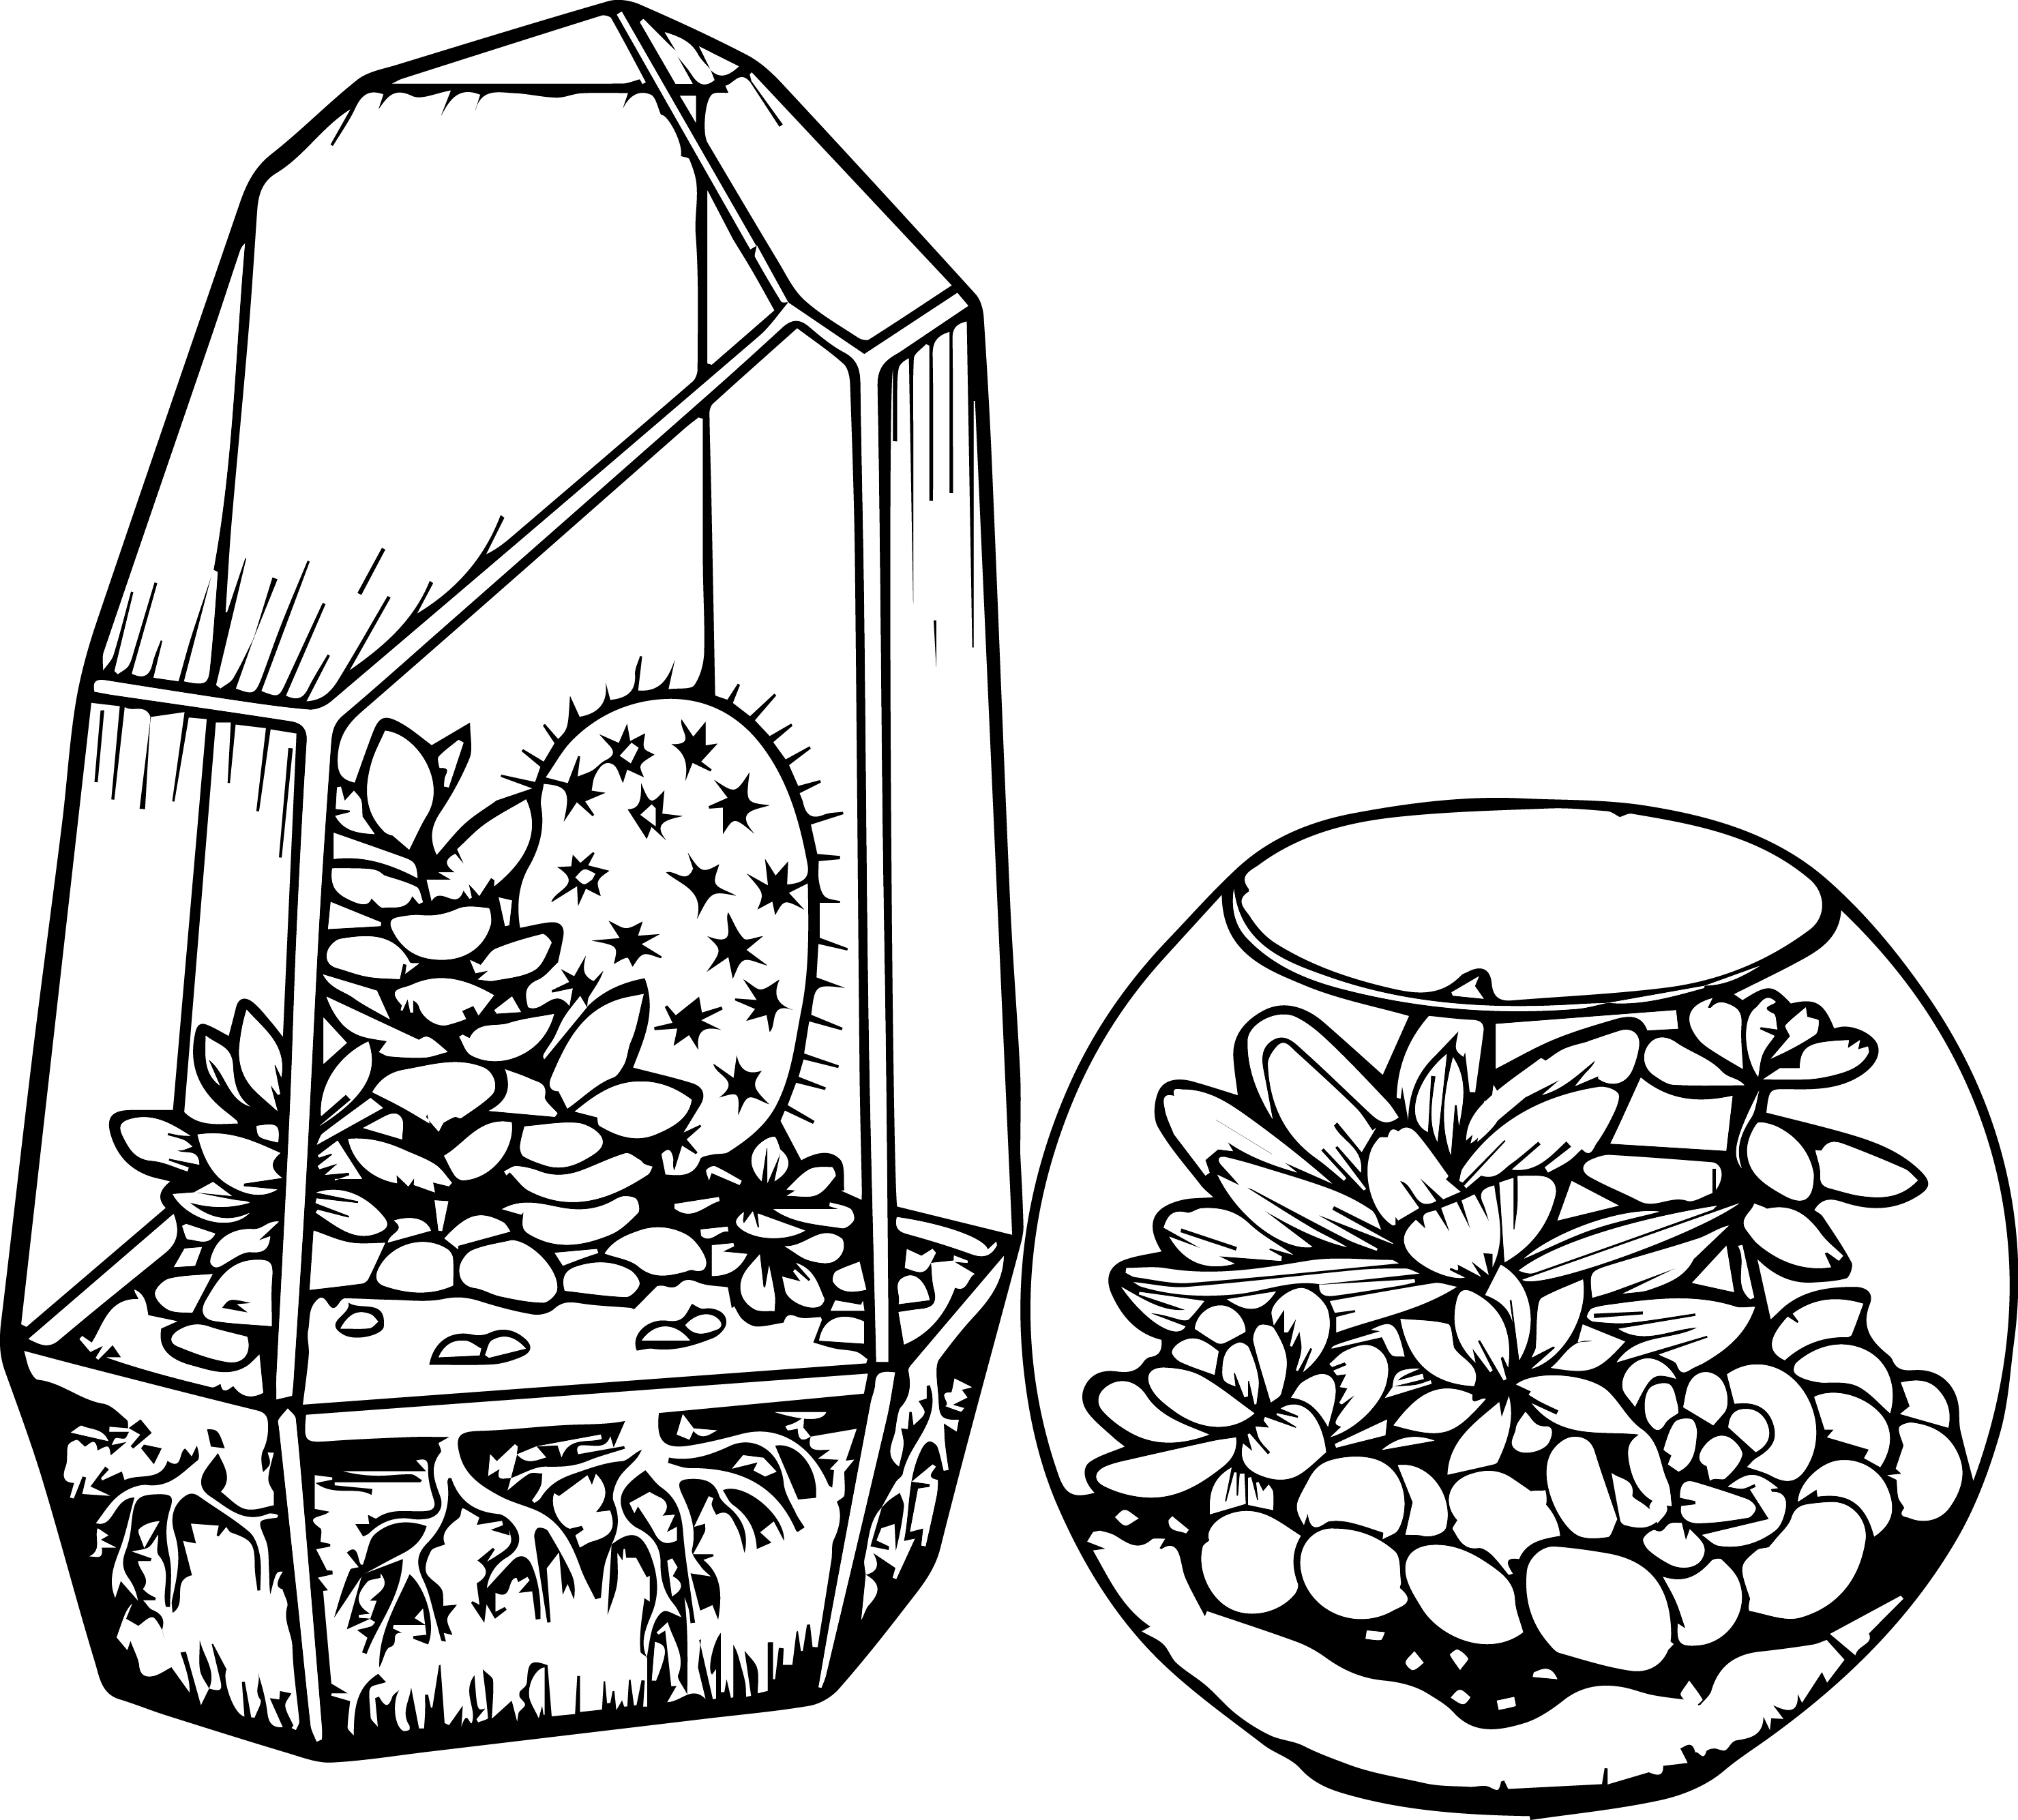 913 Animal Cute Cactus Coloring Page for Kindergarten